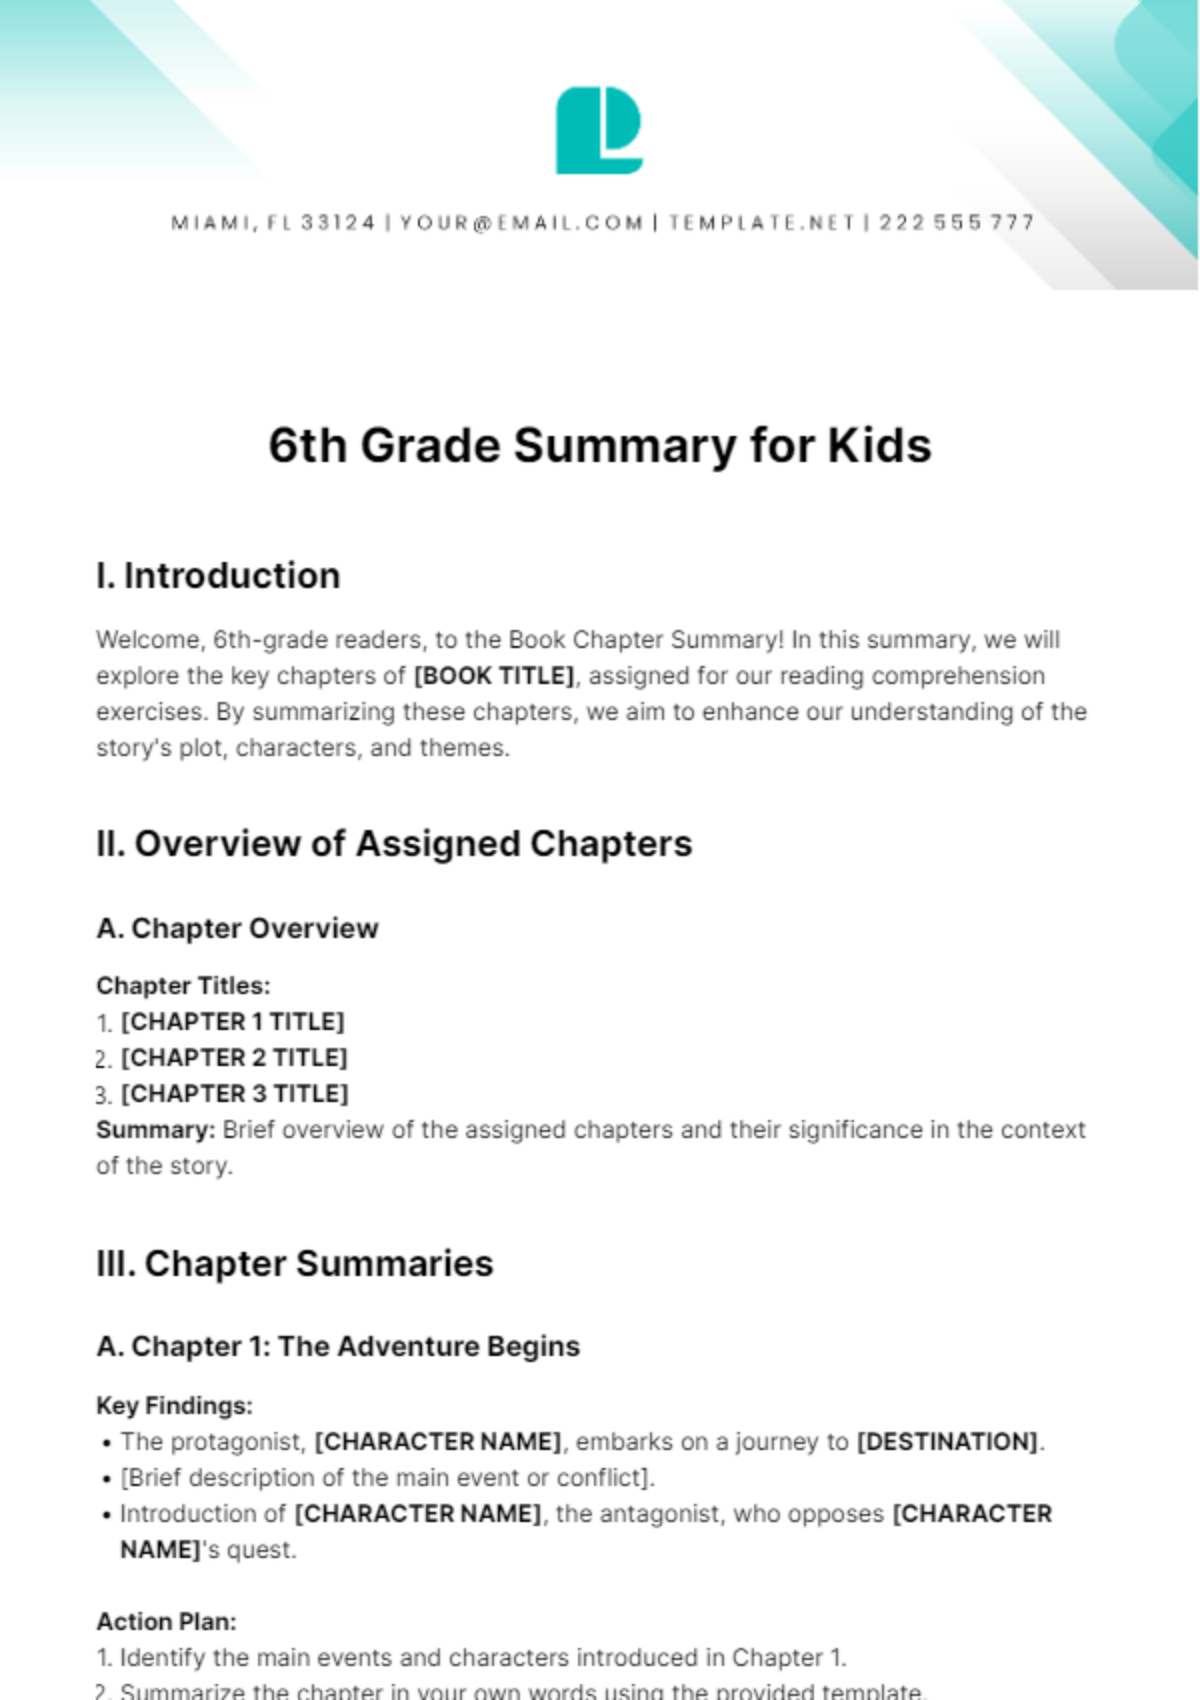 6th Grade Summary for Kids Template